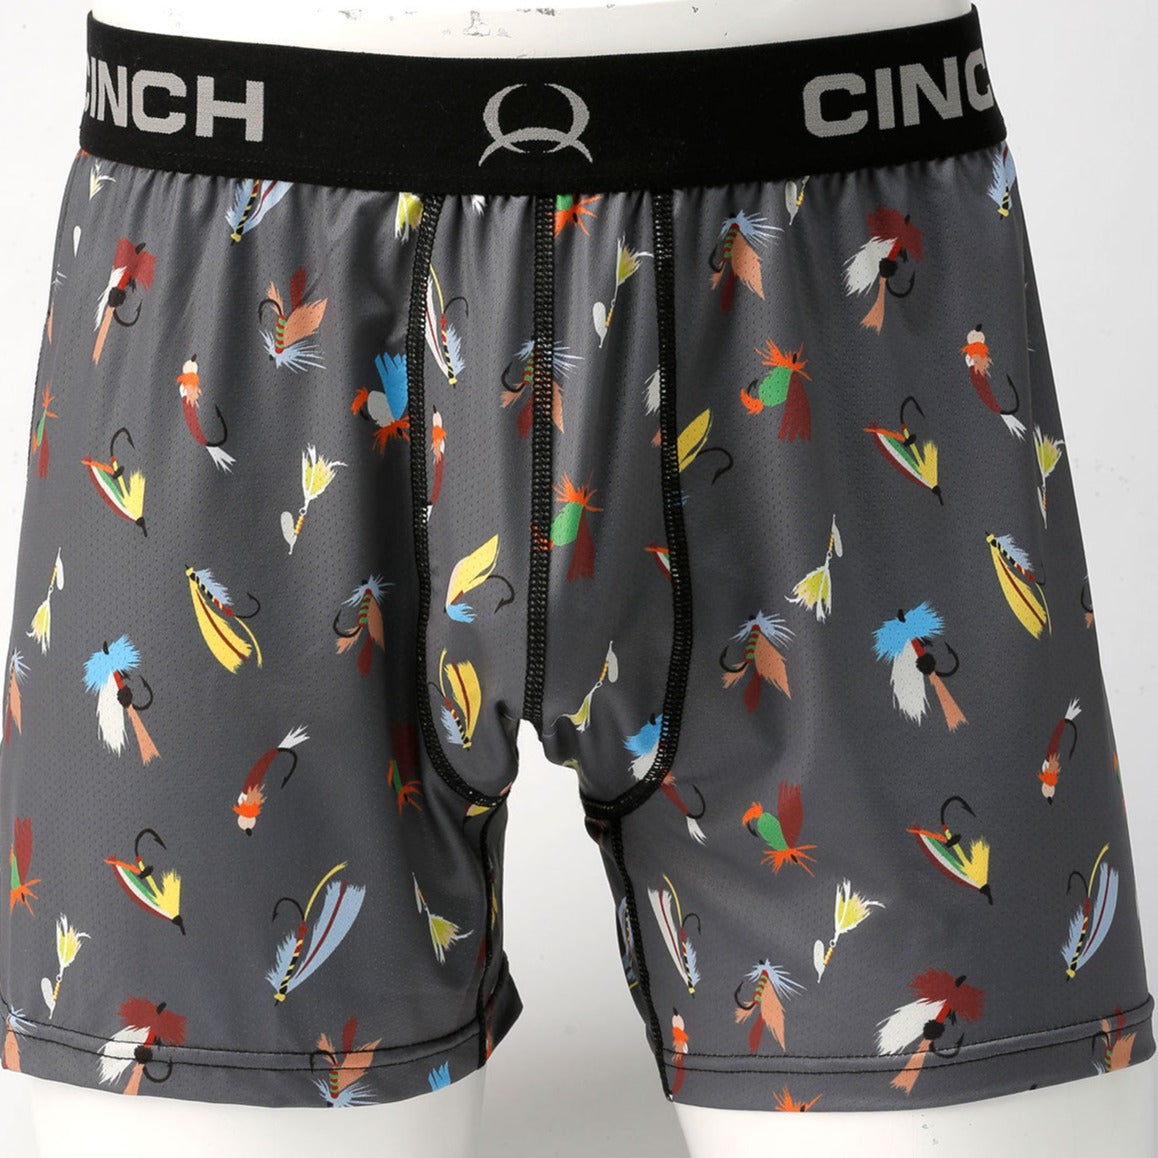 Cinch Loose Fit "Fishing Lure" Boxer Brief